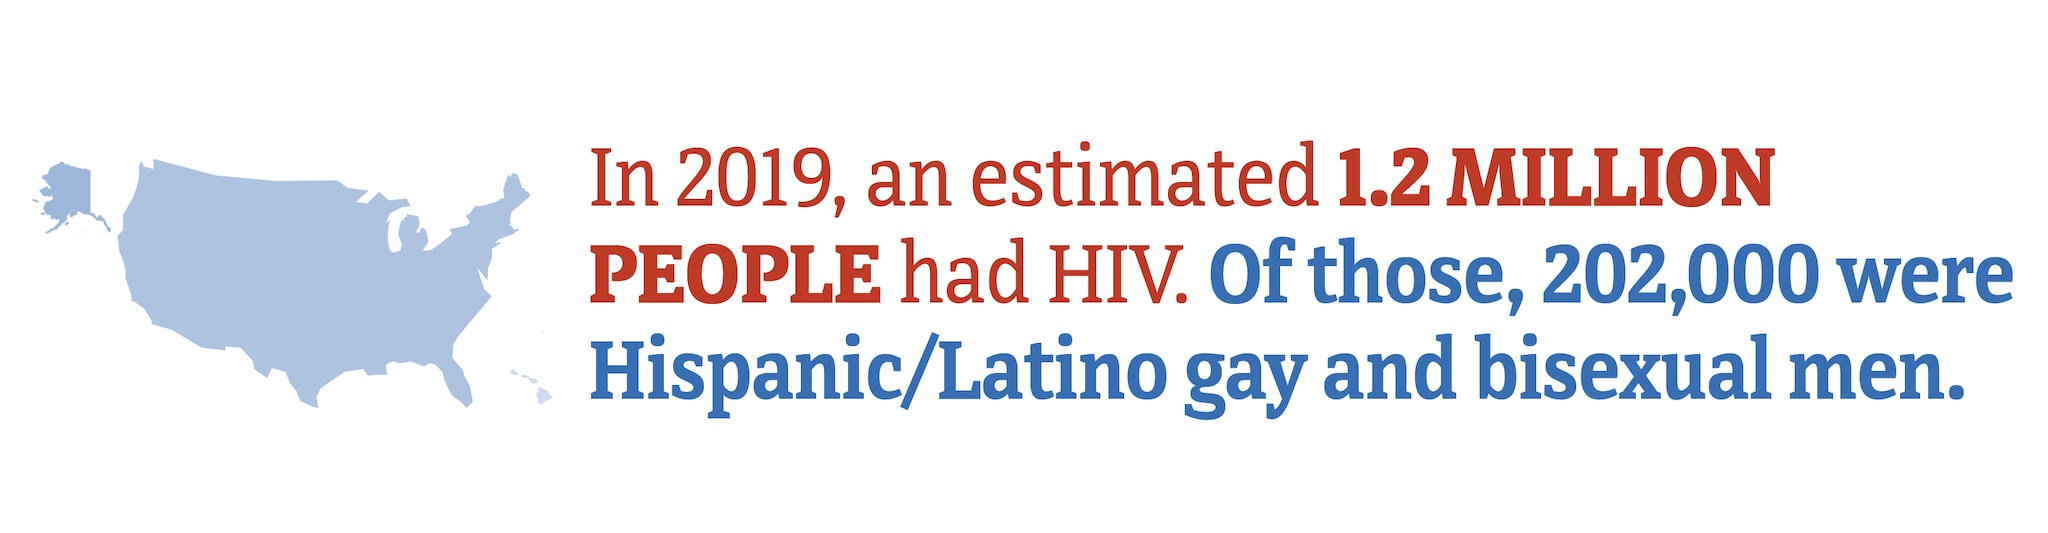 This chart shows in 2019, an estimated 202,000 Hispanic/Latino gay and bisexual men had HIV in the US.